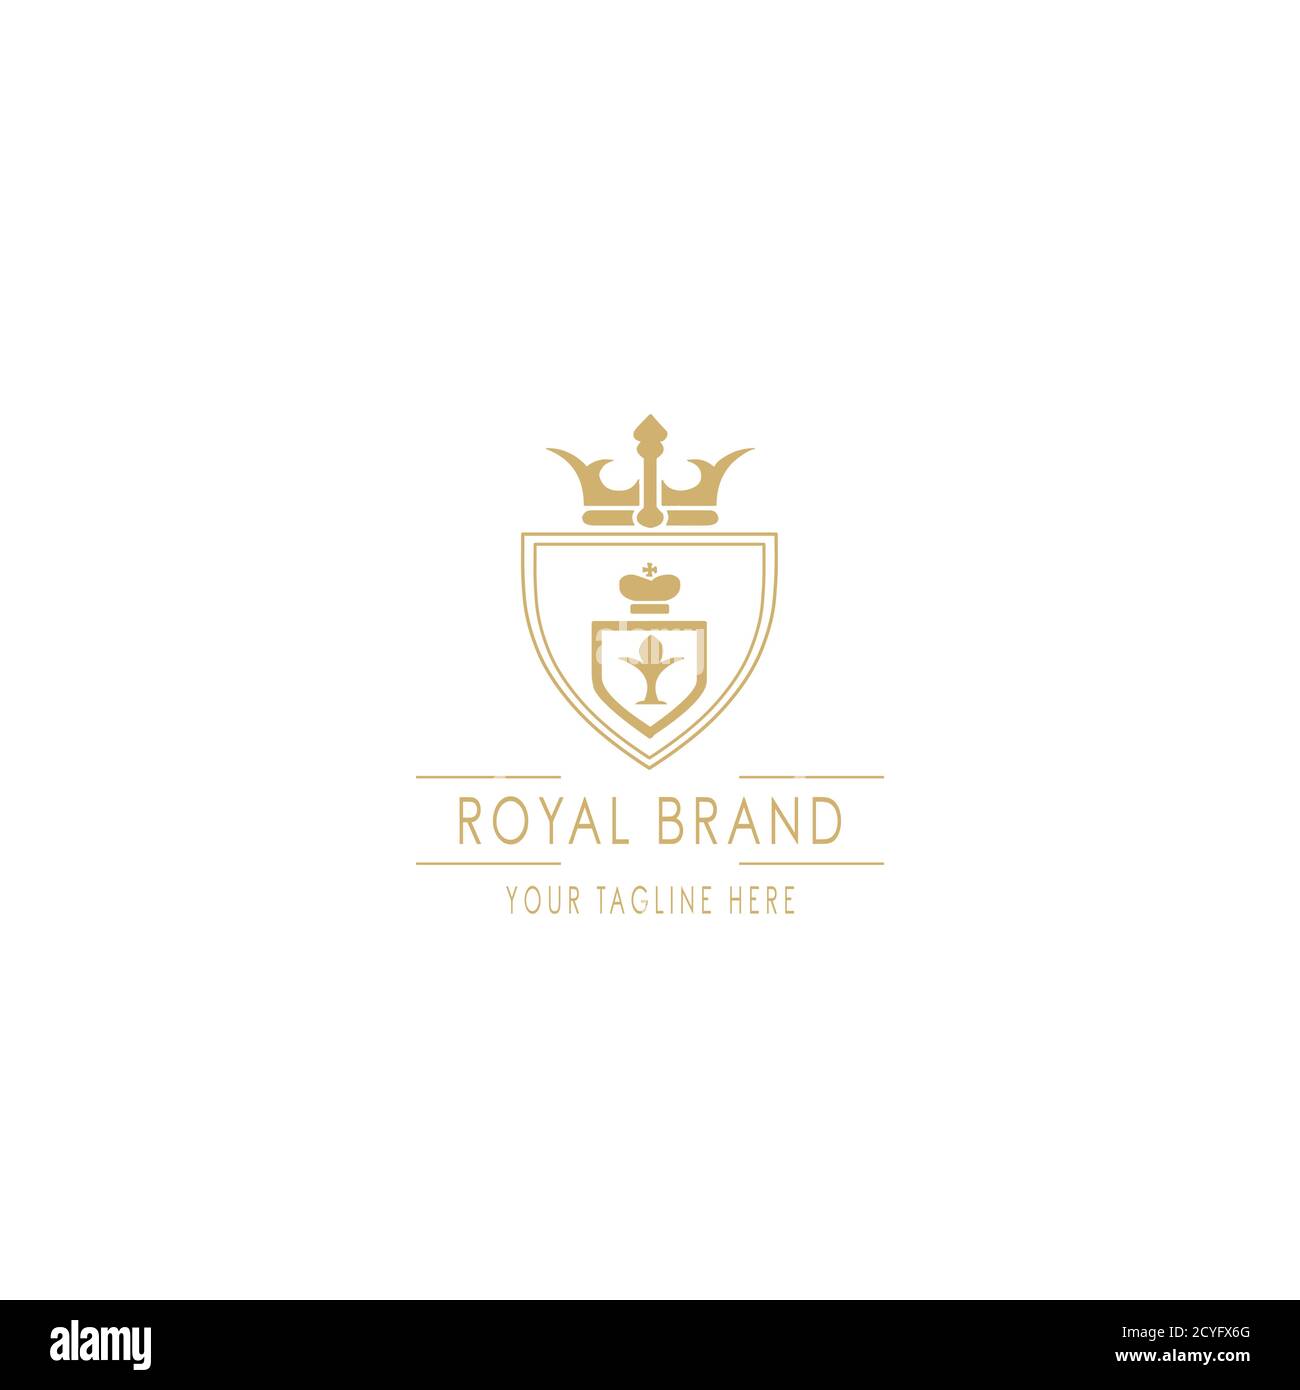 Royal brand illustration vector design for company and business royal hotel. Stock Vector